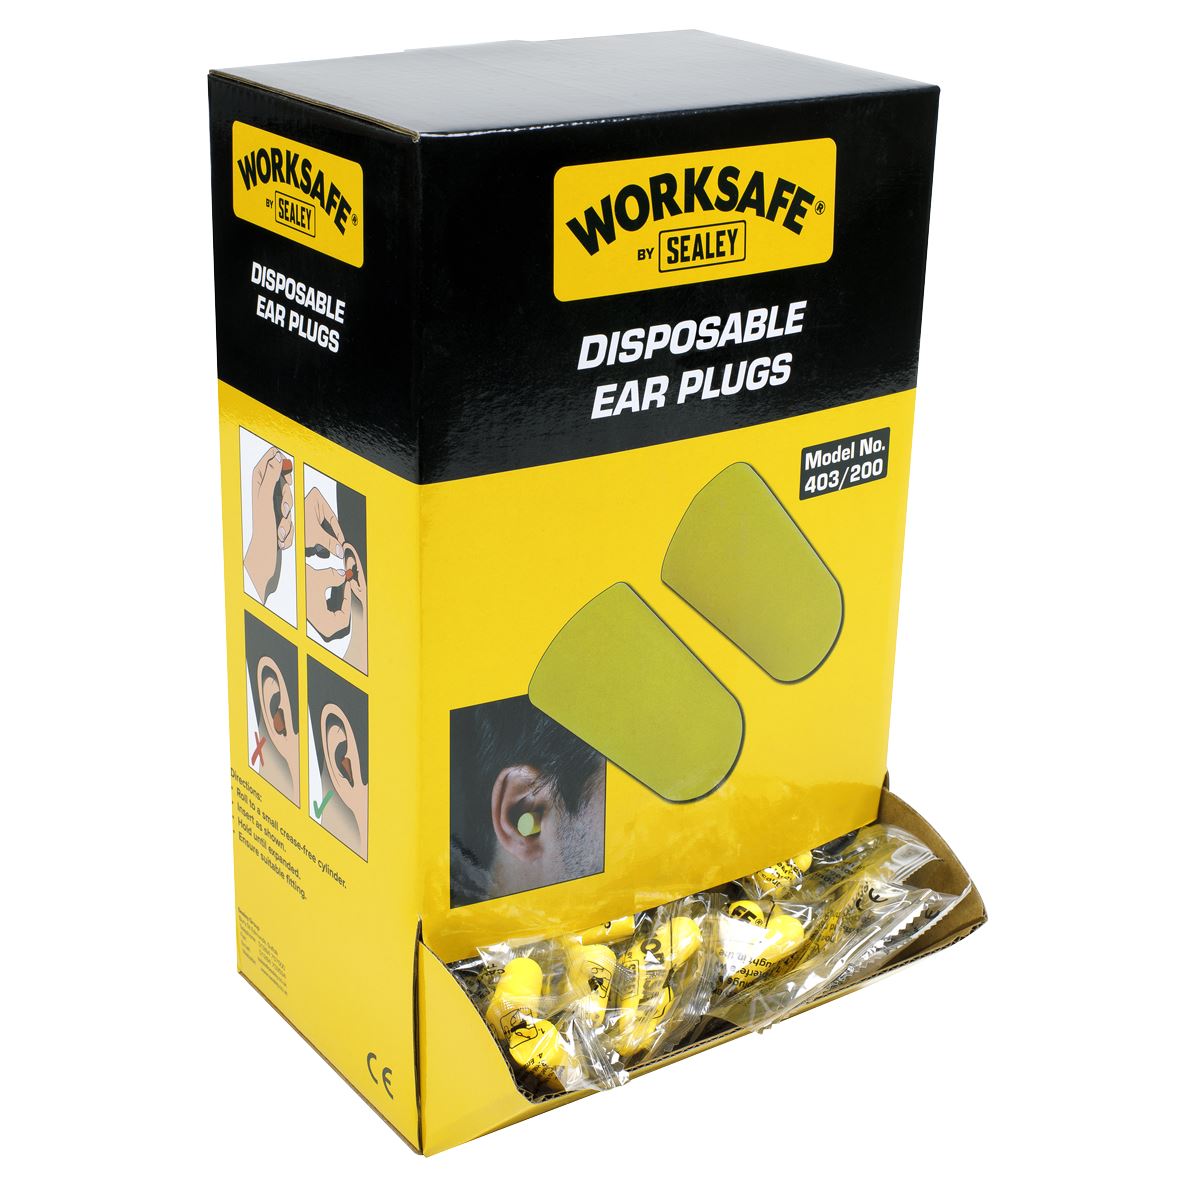 Worksafe by Sealey Ear Plugs Disposable - 200 Pairs